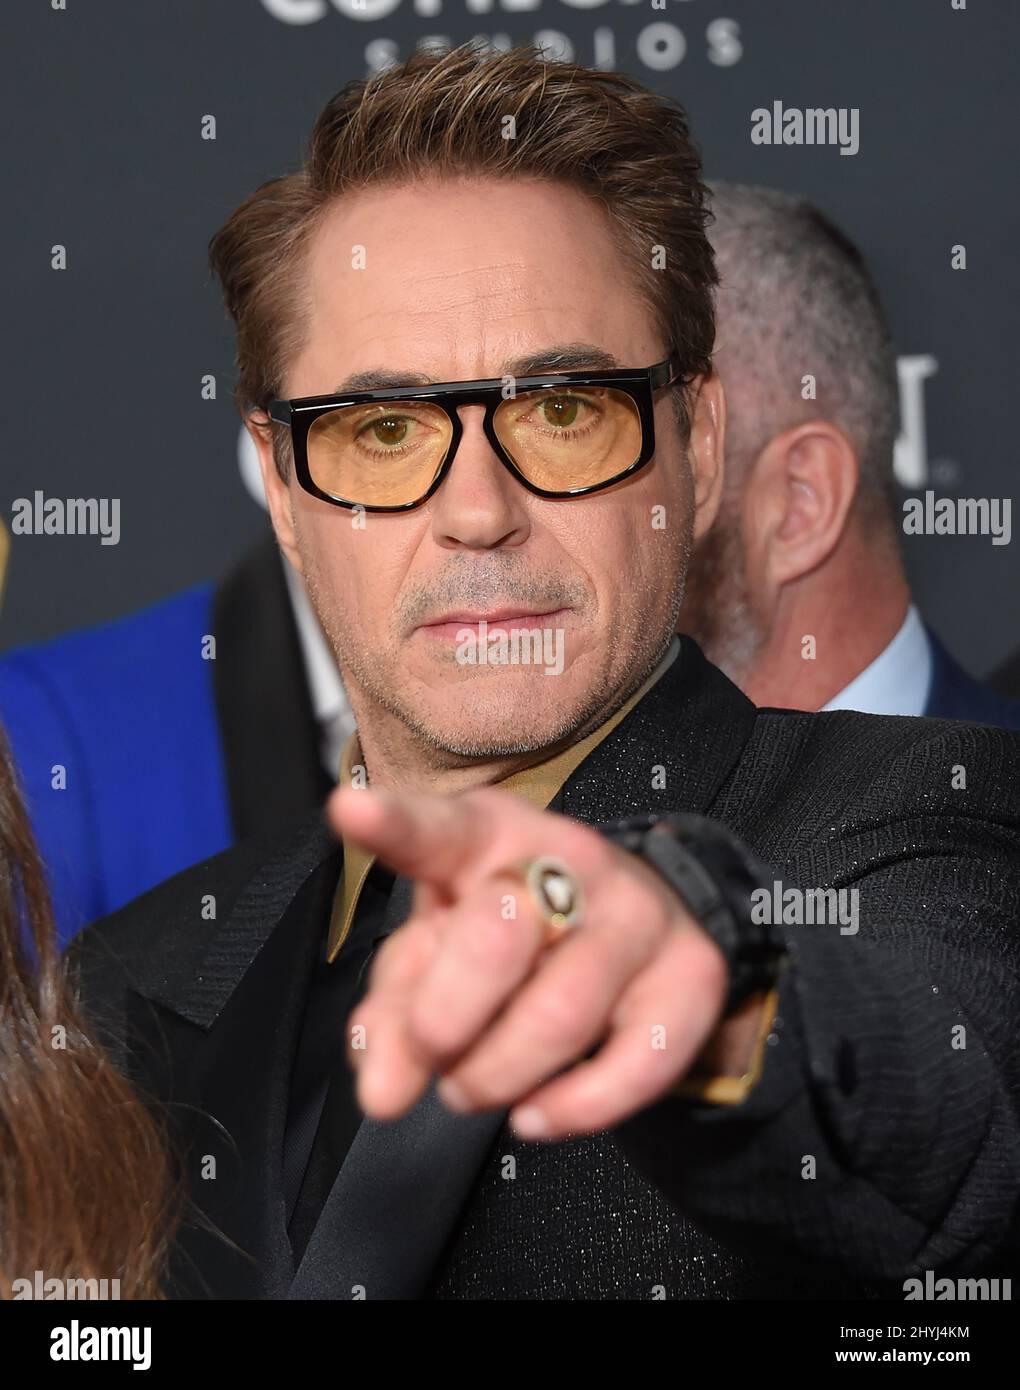 Robert Downey Jr. attending the world premiere of Avengers: Endgame held at the LA Convention Centre on April 22, 2019 in Los Angeles, California Stock Photo